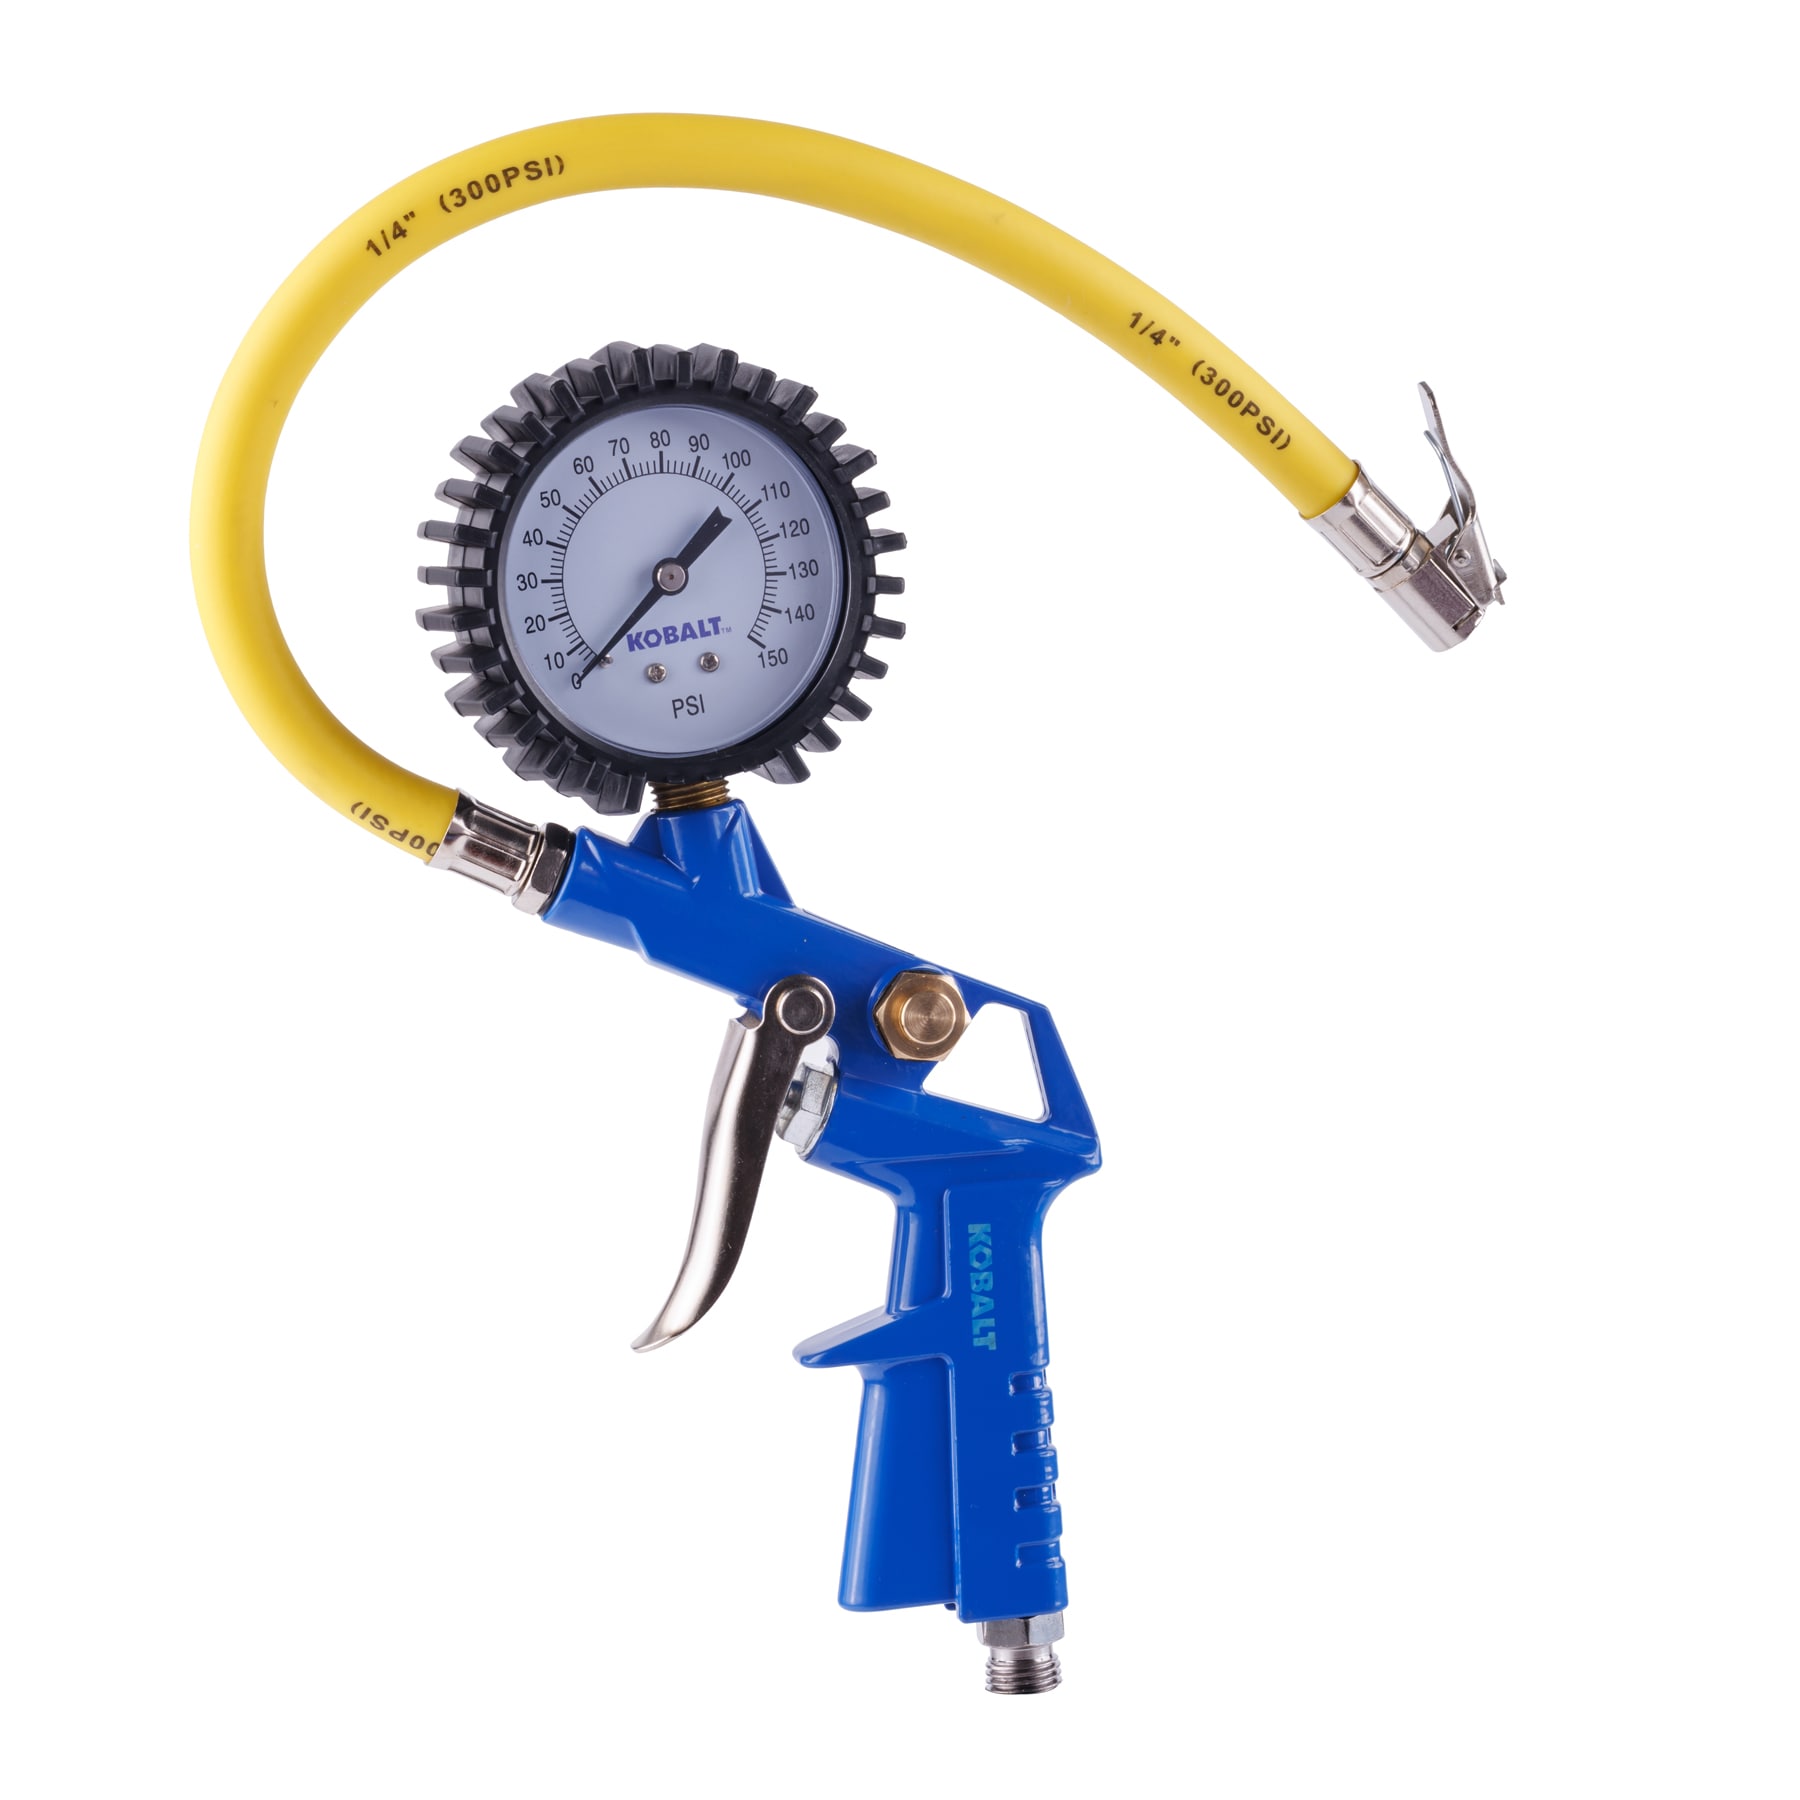 Tire Inflator with Pressure Gauge and Longer Hose - Most Accurate, Heavy